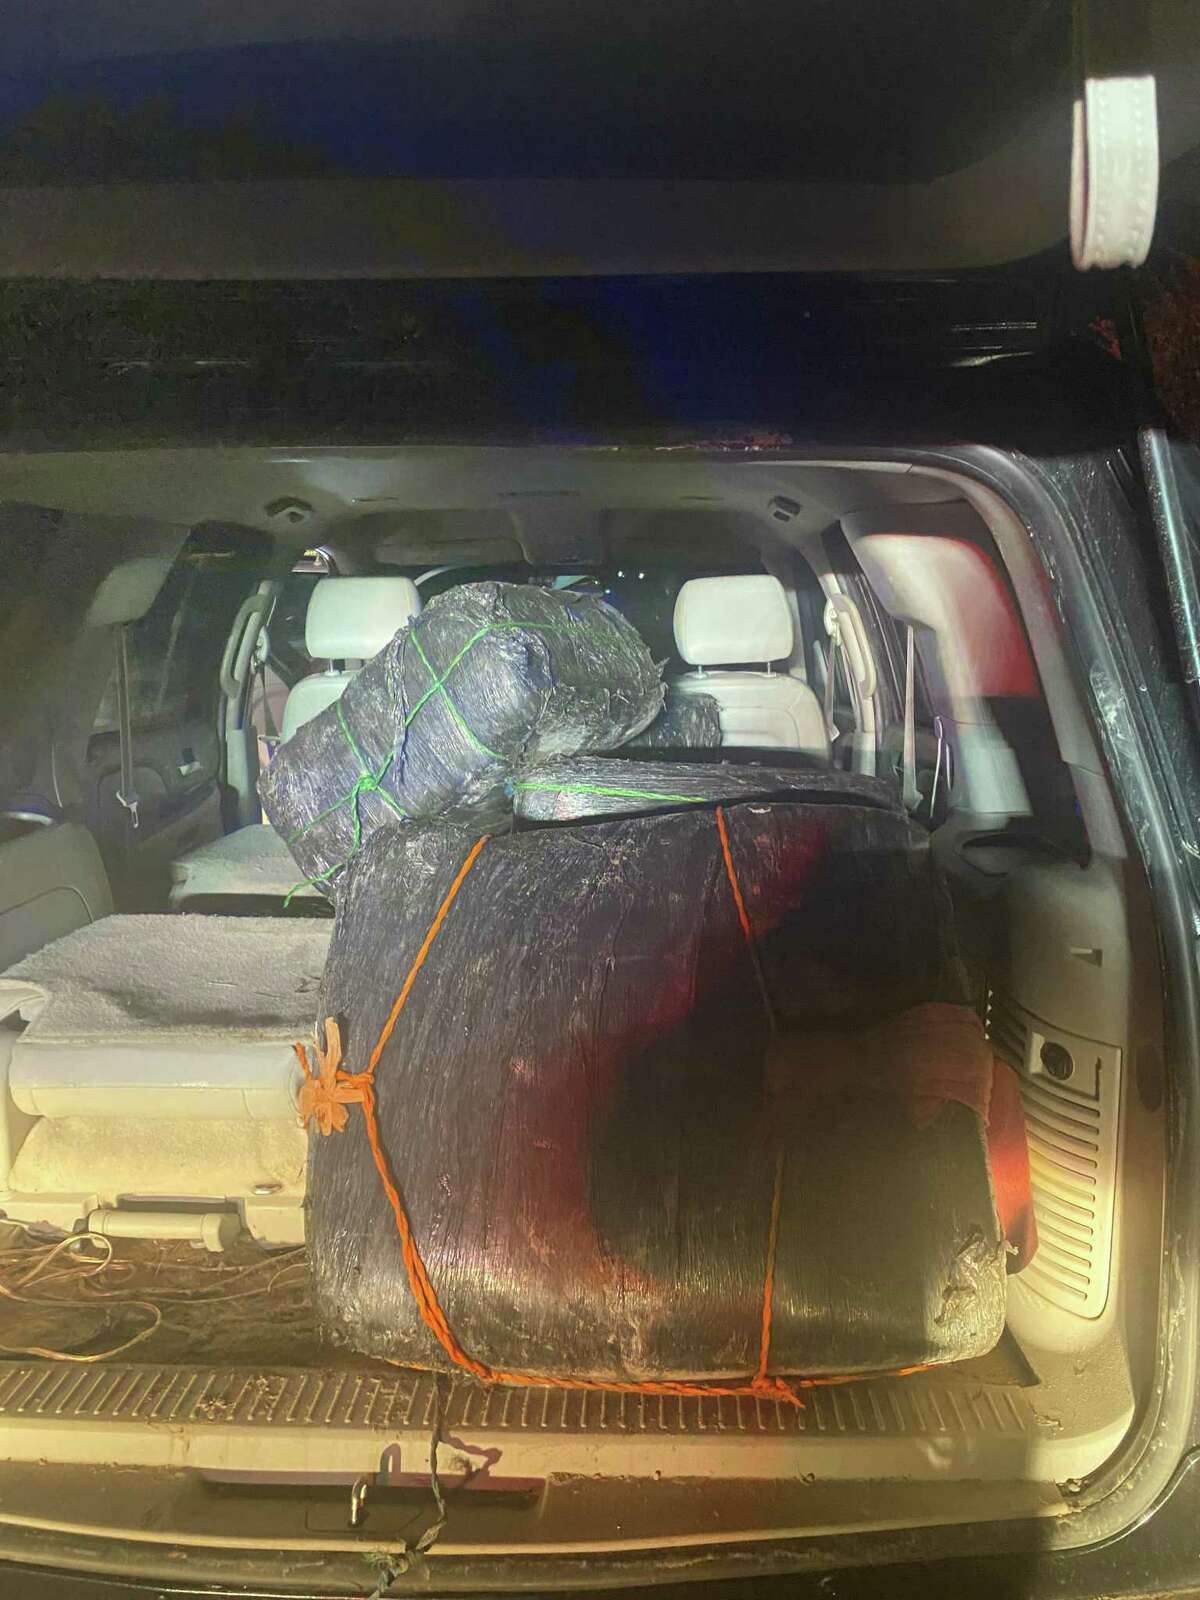 Four bundles of marijuana worth nearly $200,000 were seized after a failed smuggling attempt in Laredo on Wednesday, Oct. 19, 2022.